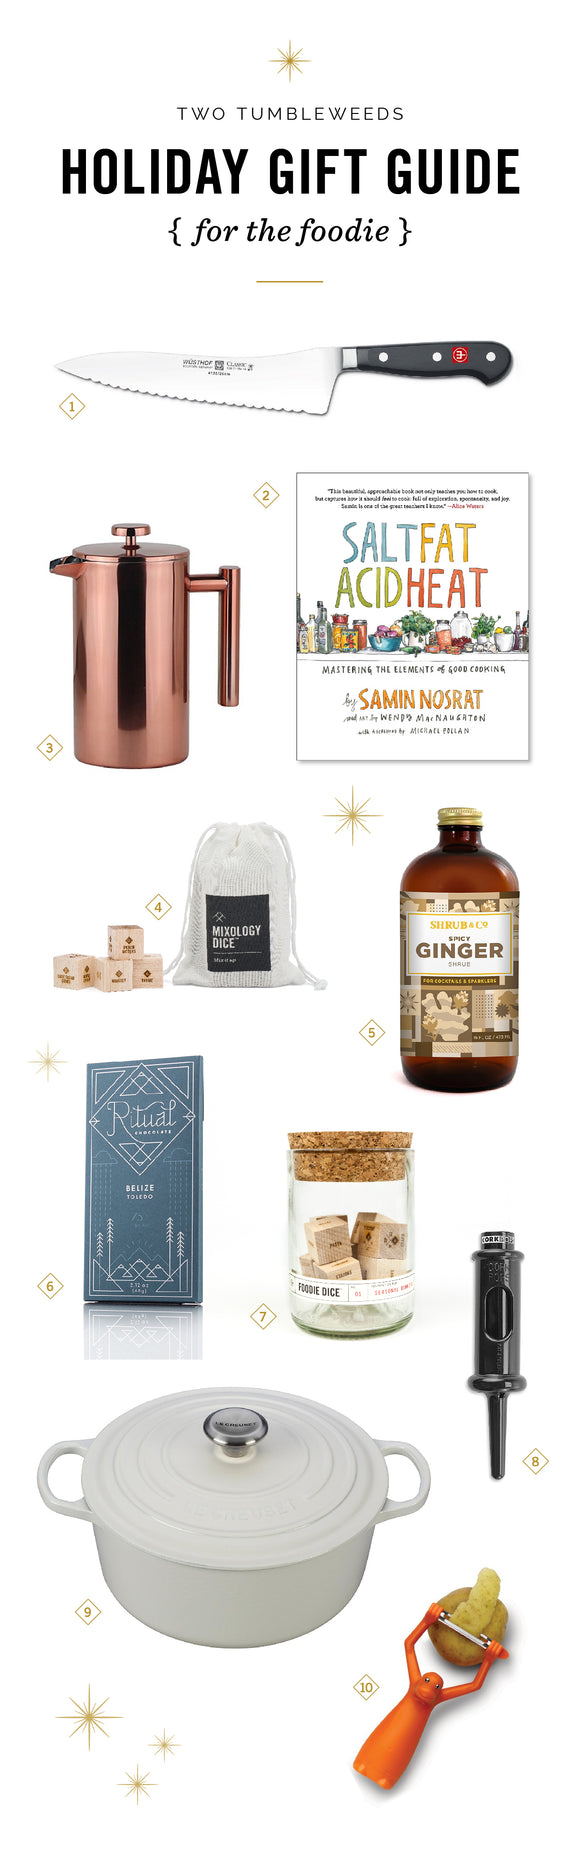 2017 Holiday Gift Guide for Foodies